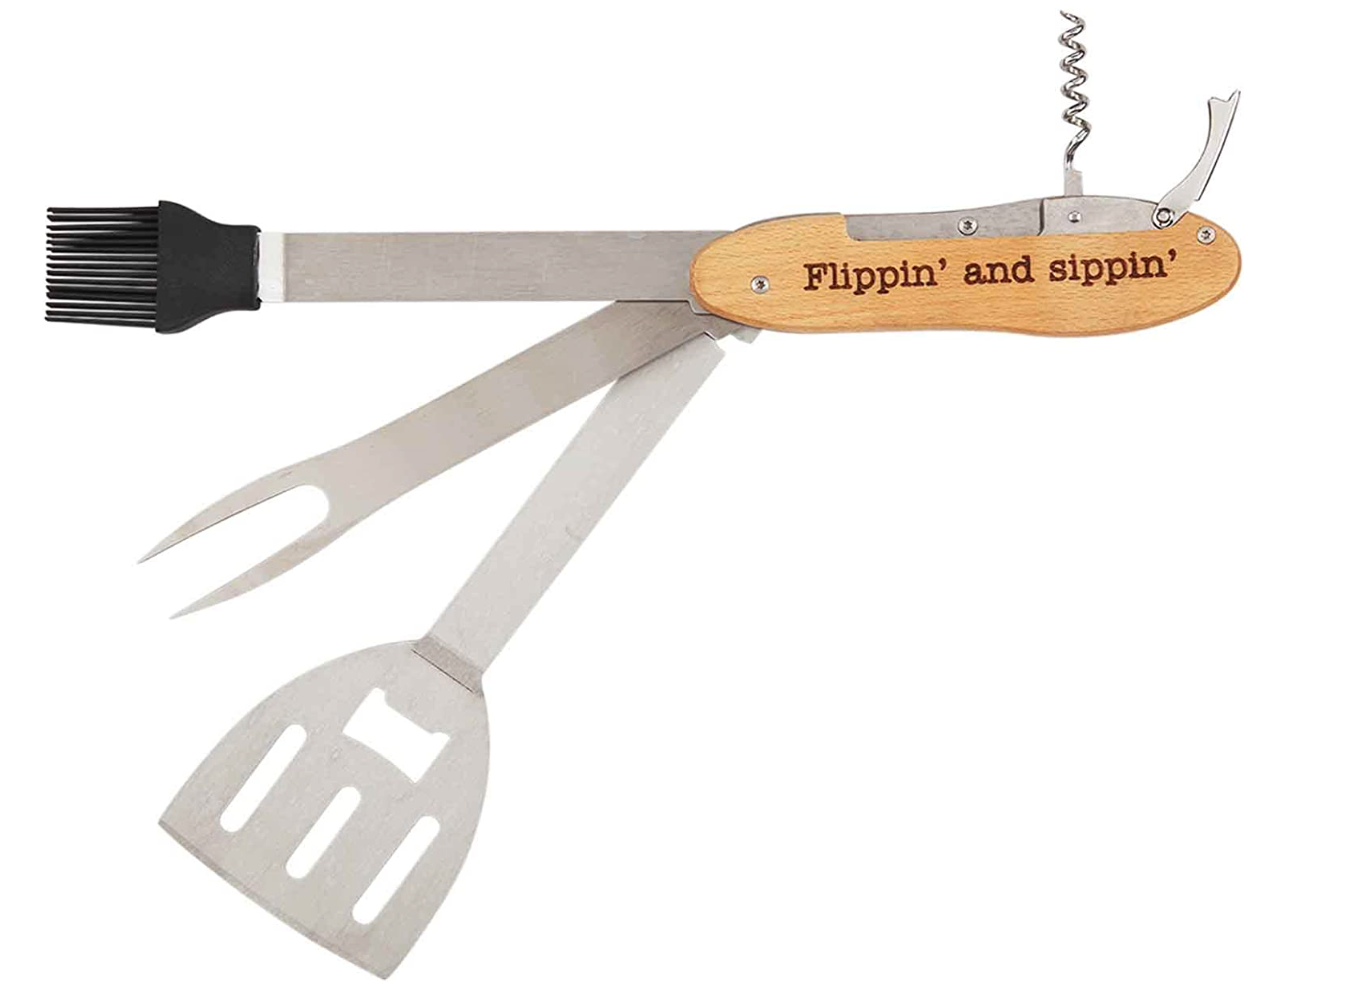 Grilling Tool Set from Mudpie